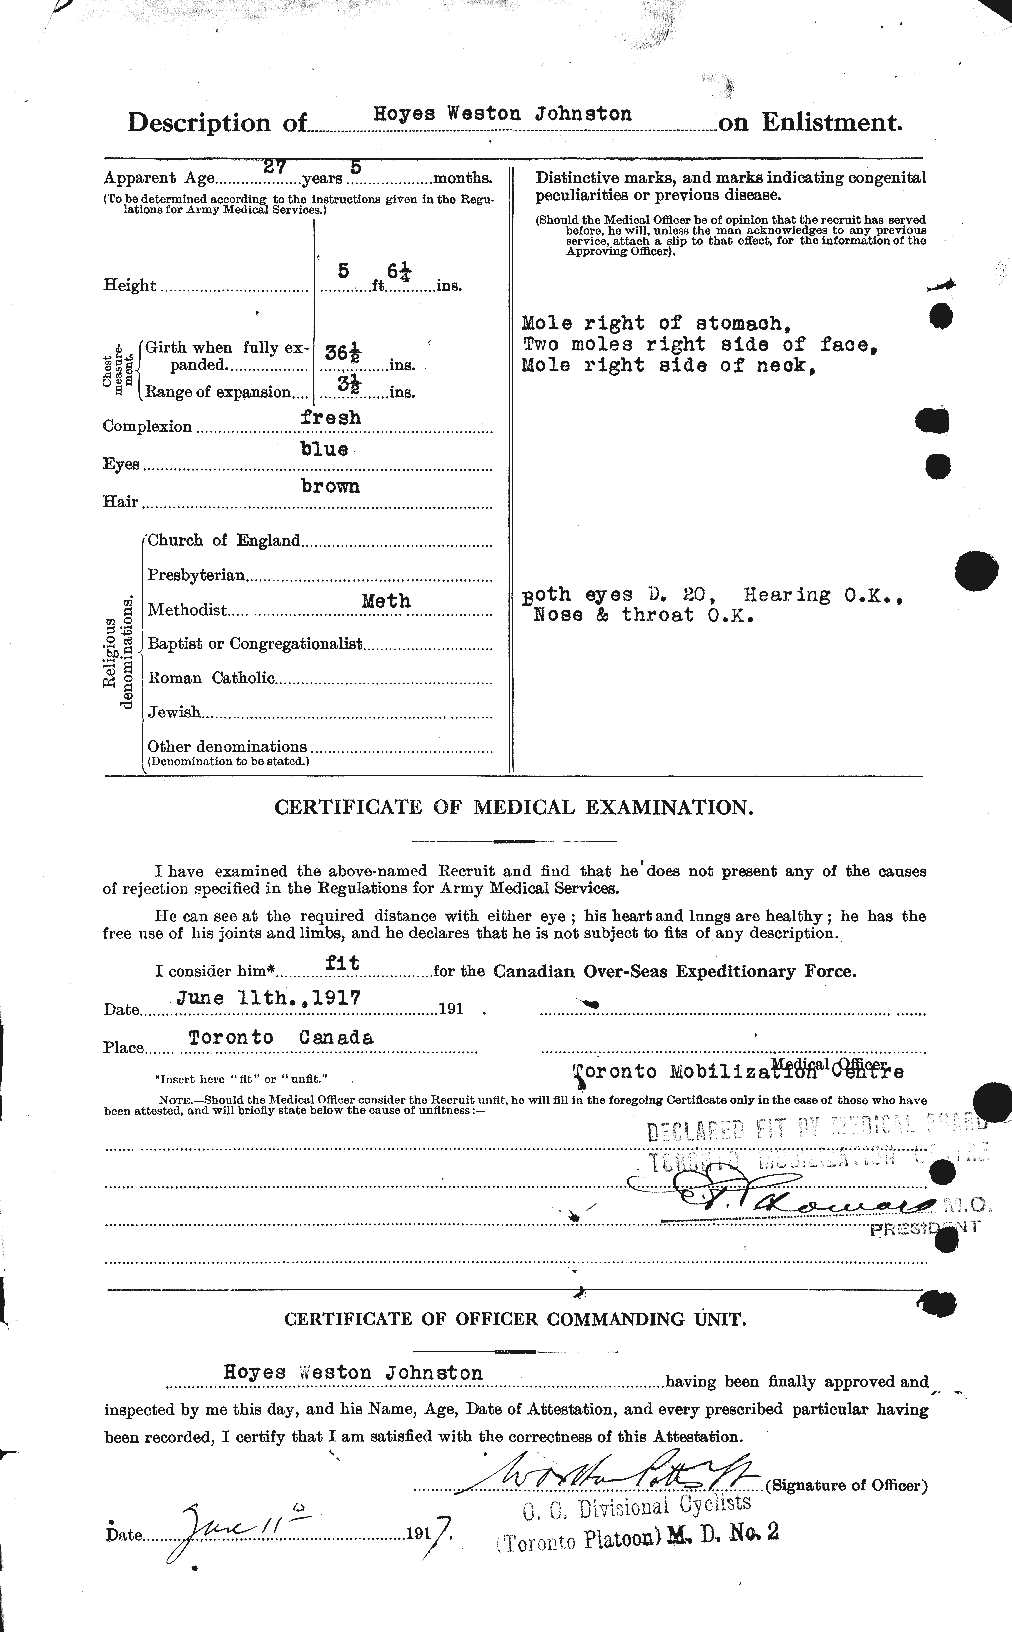 Personnel Records of the First World War - CEF 422656b